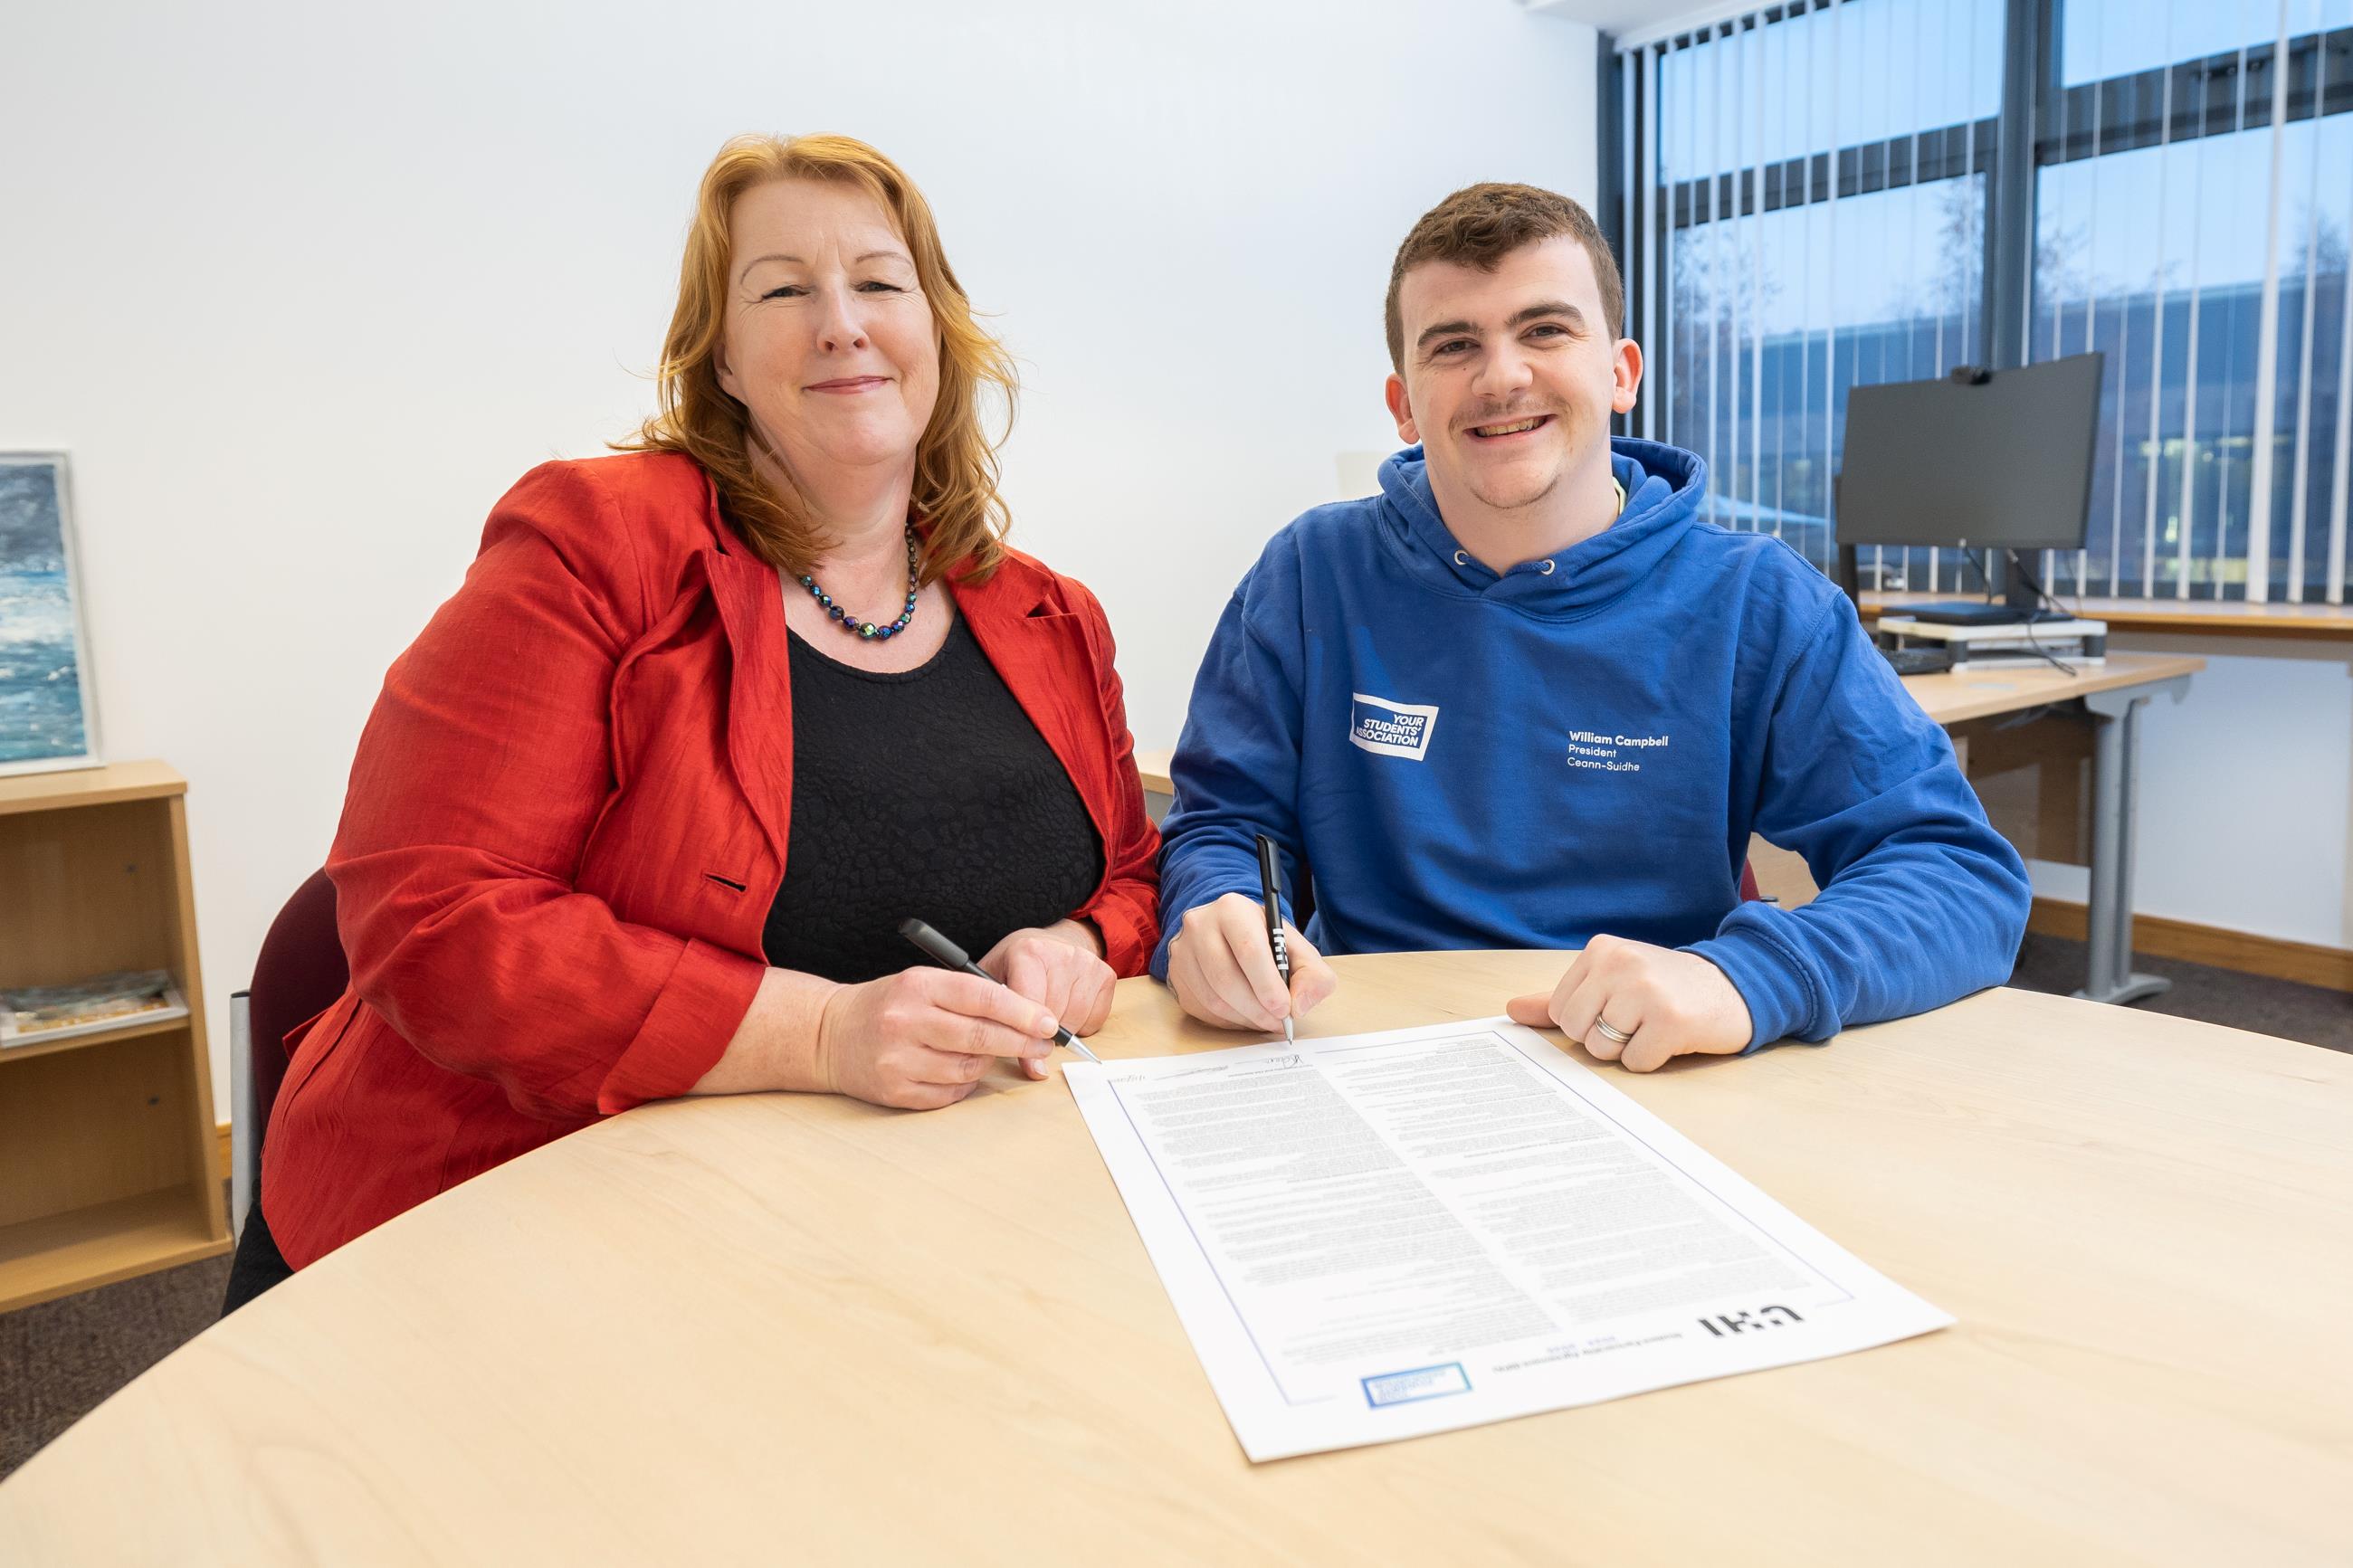 UHI and Your Students’ Association sign new Student Partnership Agreement